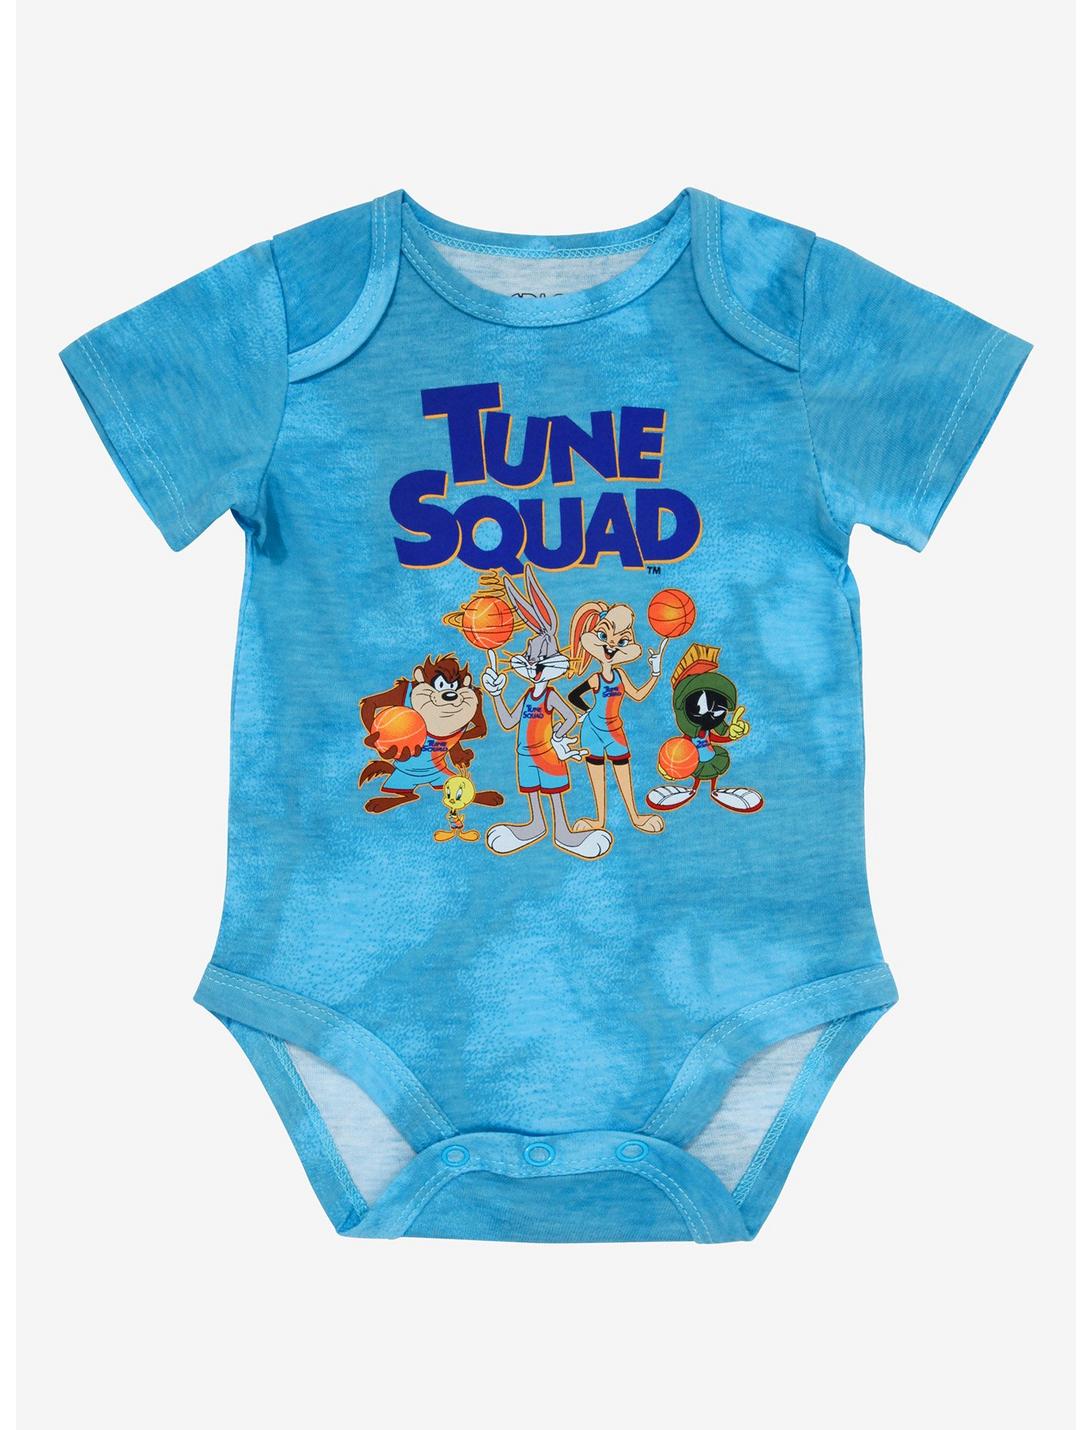 Space Jam: A New Legacy Tune Squad Infant One-Piece - BoxLunch Exclusive, BLUE, hi-res